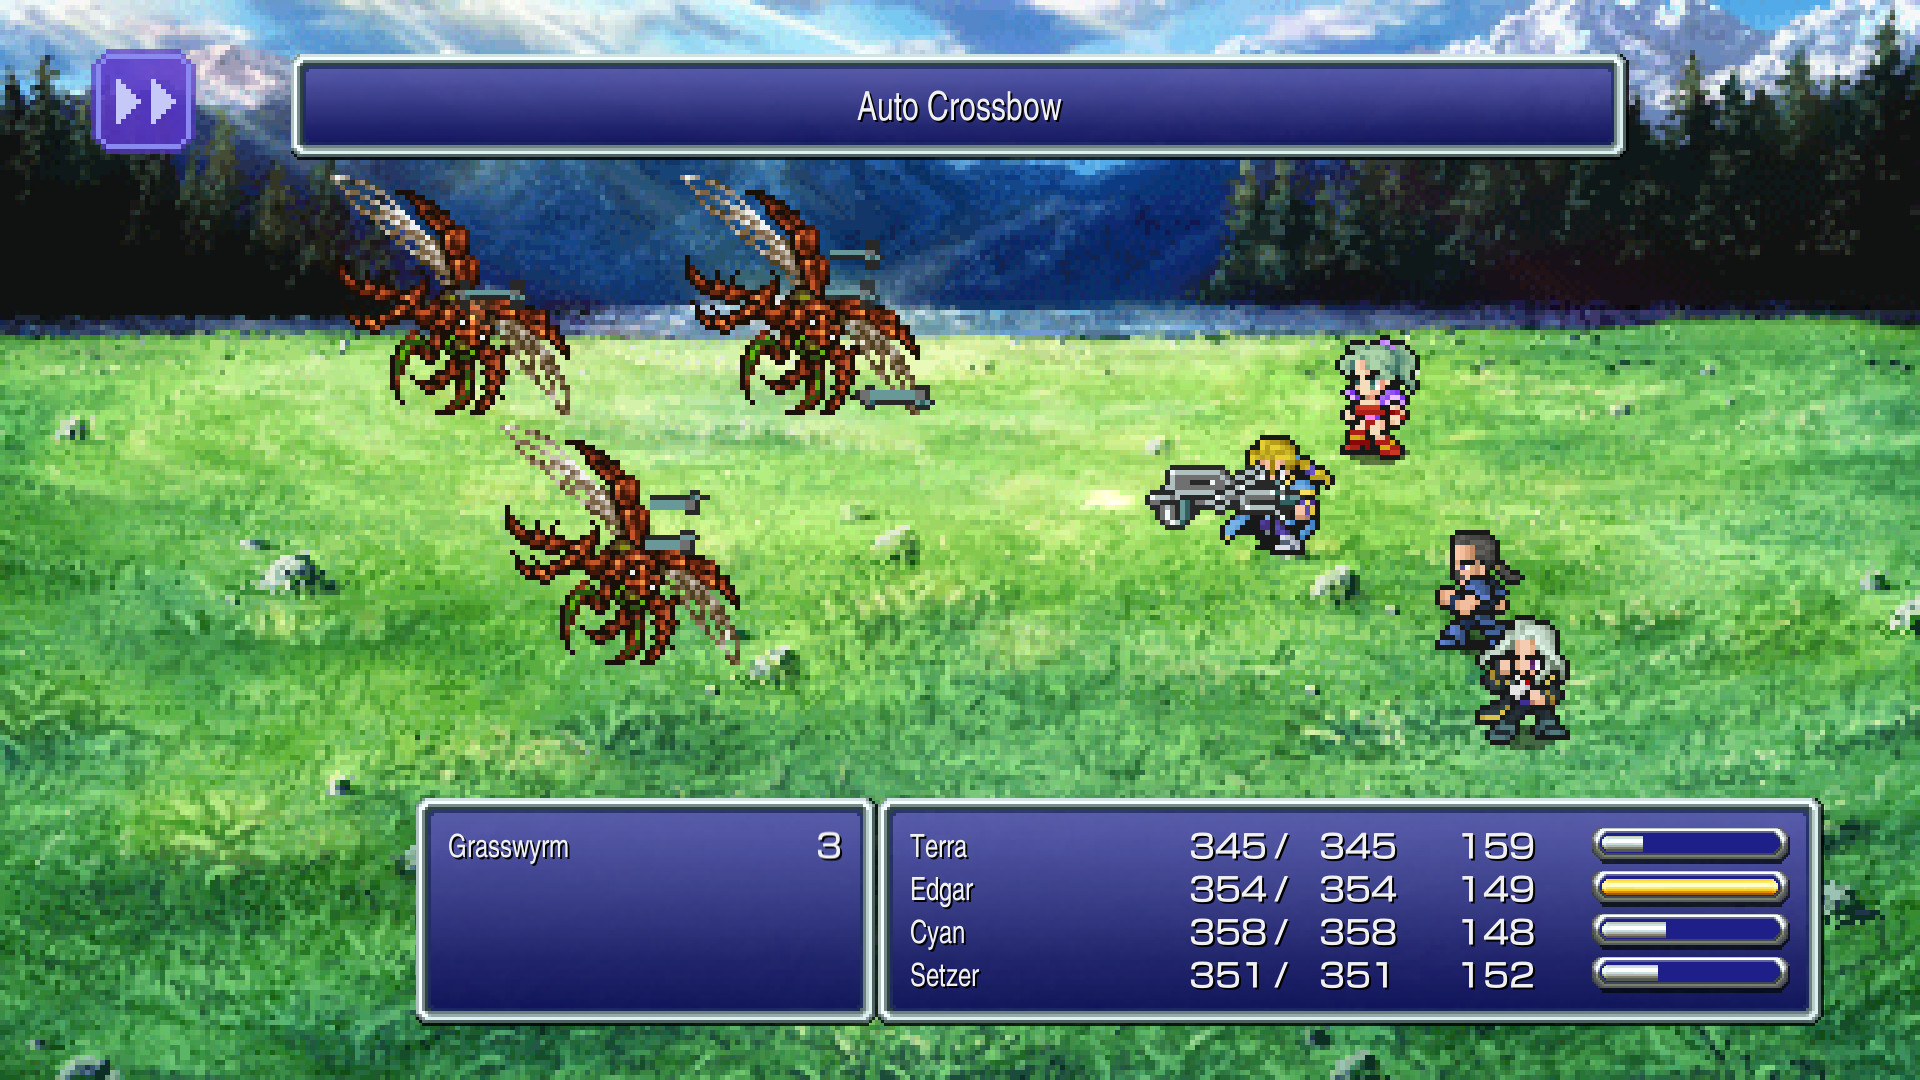 The Final Fantasy Pixel Remasters reportedly heading to consoles